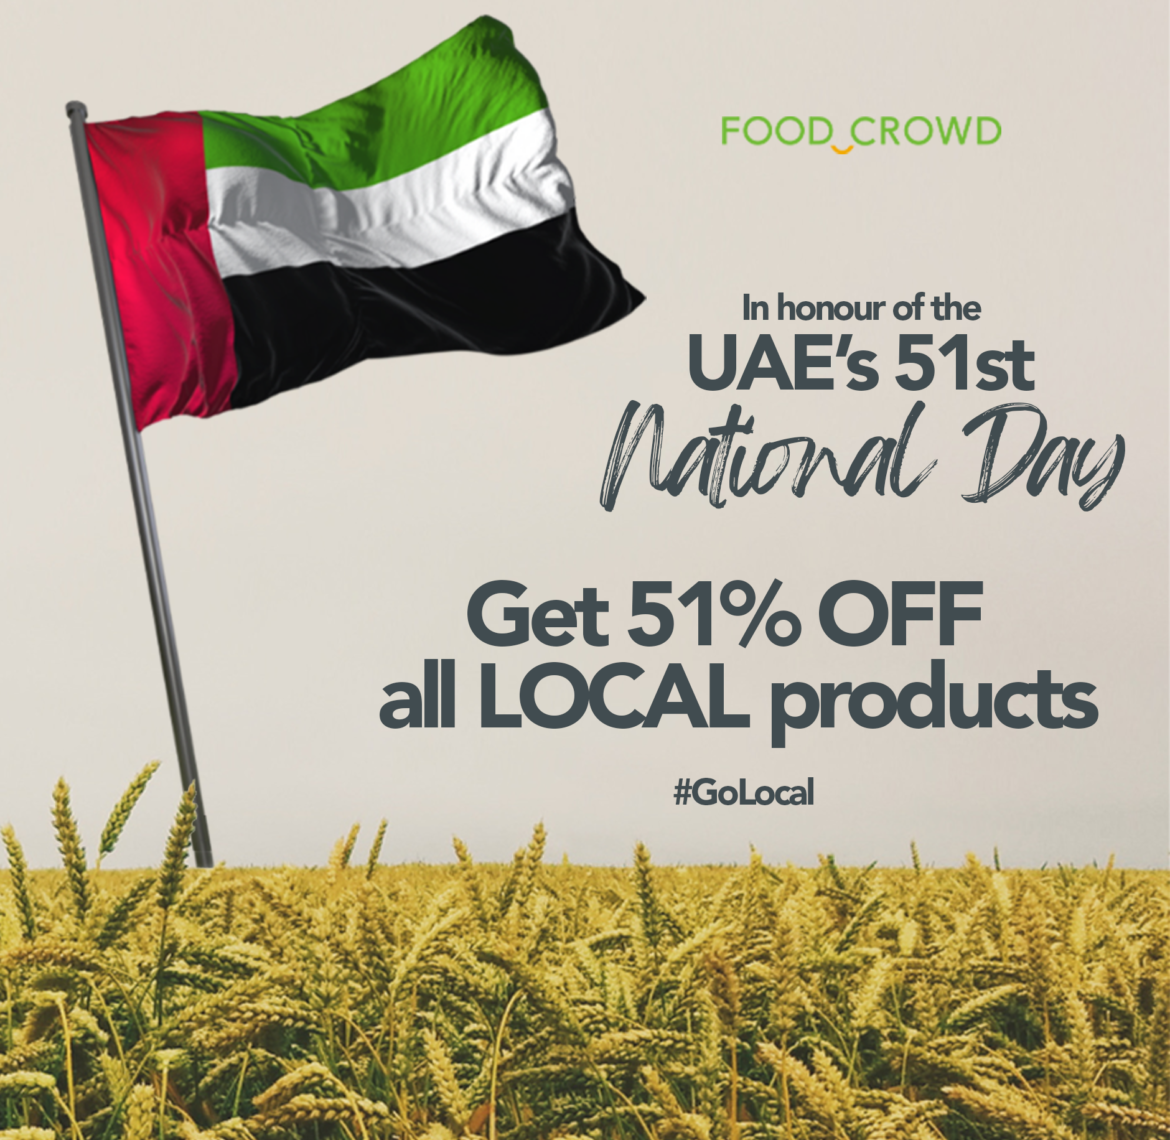 Food Crowd Encourages Celebrating UAE National Day With Locally-Grown Produce